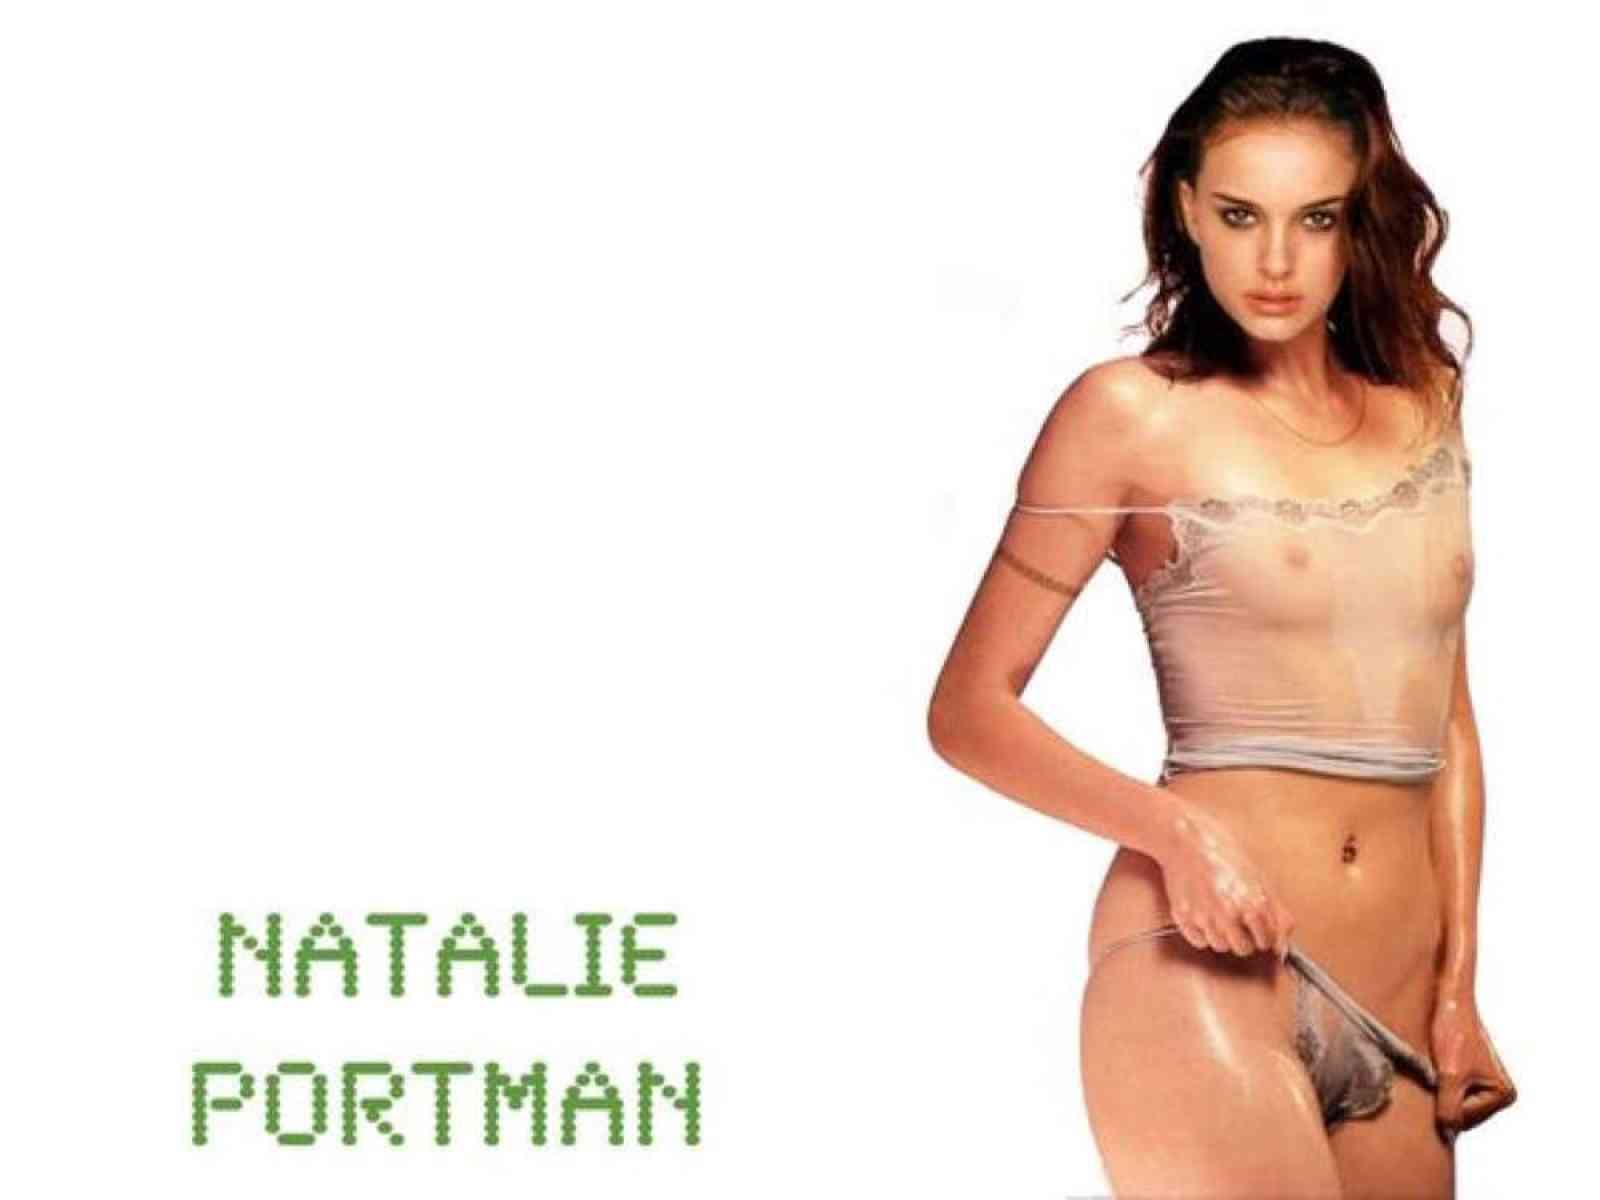 Naked Pictures Of Natalie Portman